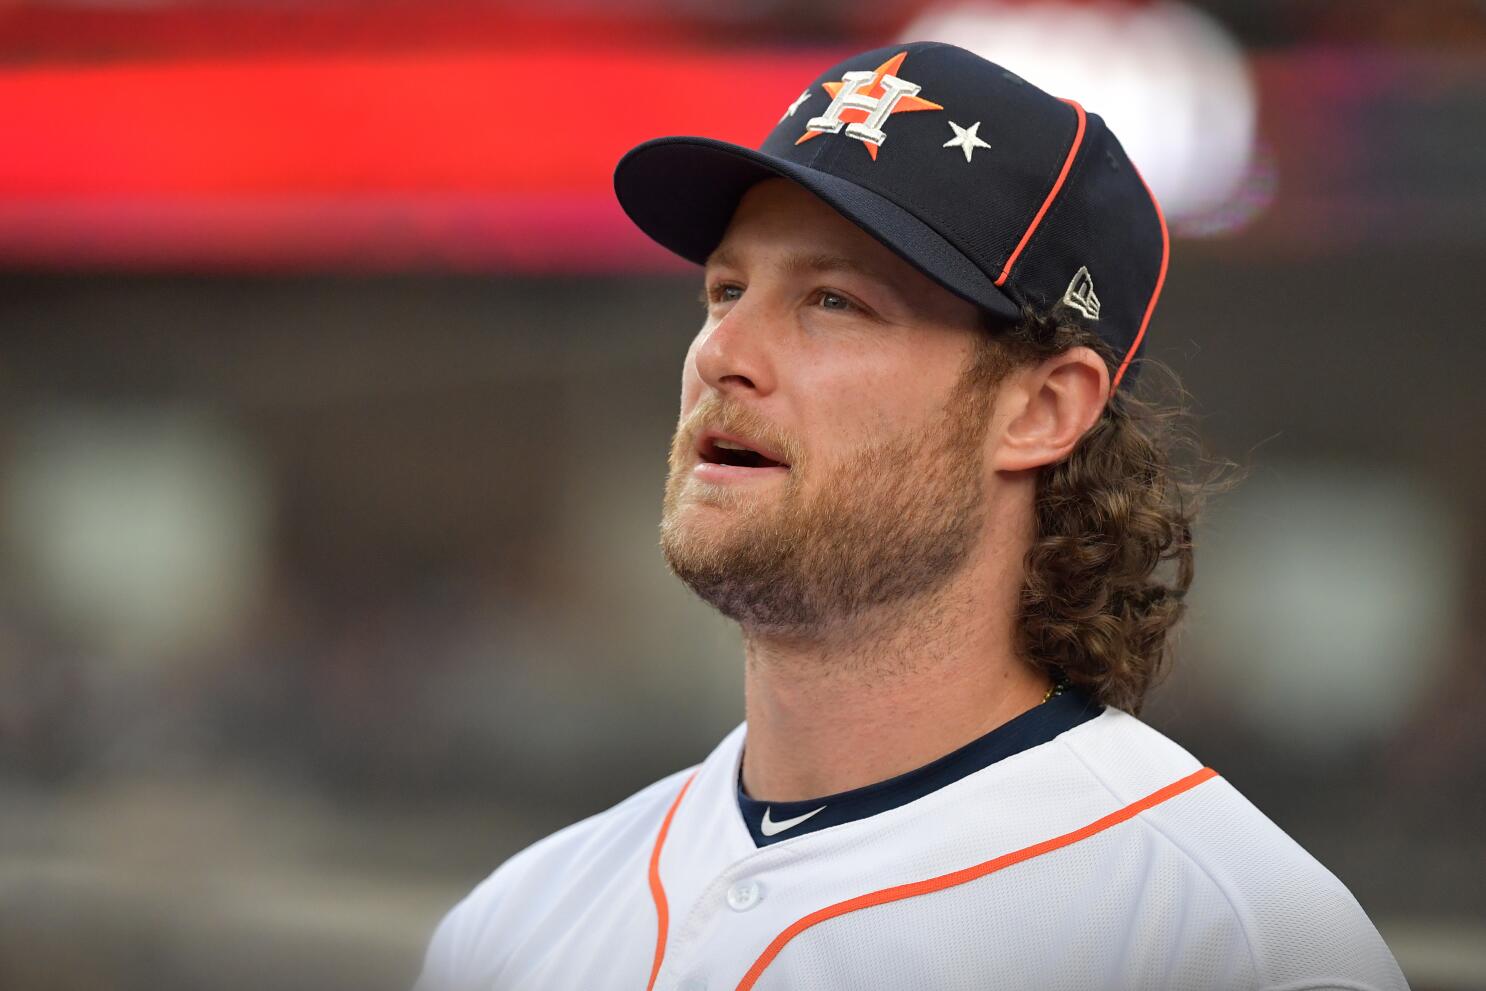 Yankees' Gerrit Cole tells his 9/11 story after blanking Orioles in NYPD cap